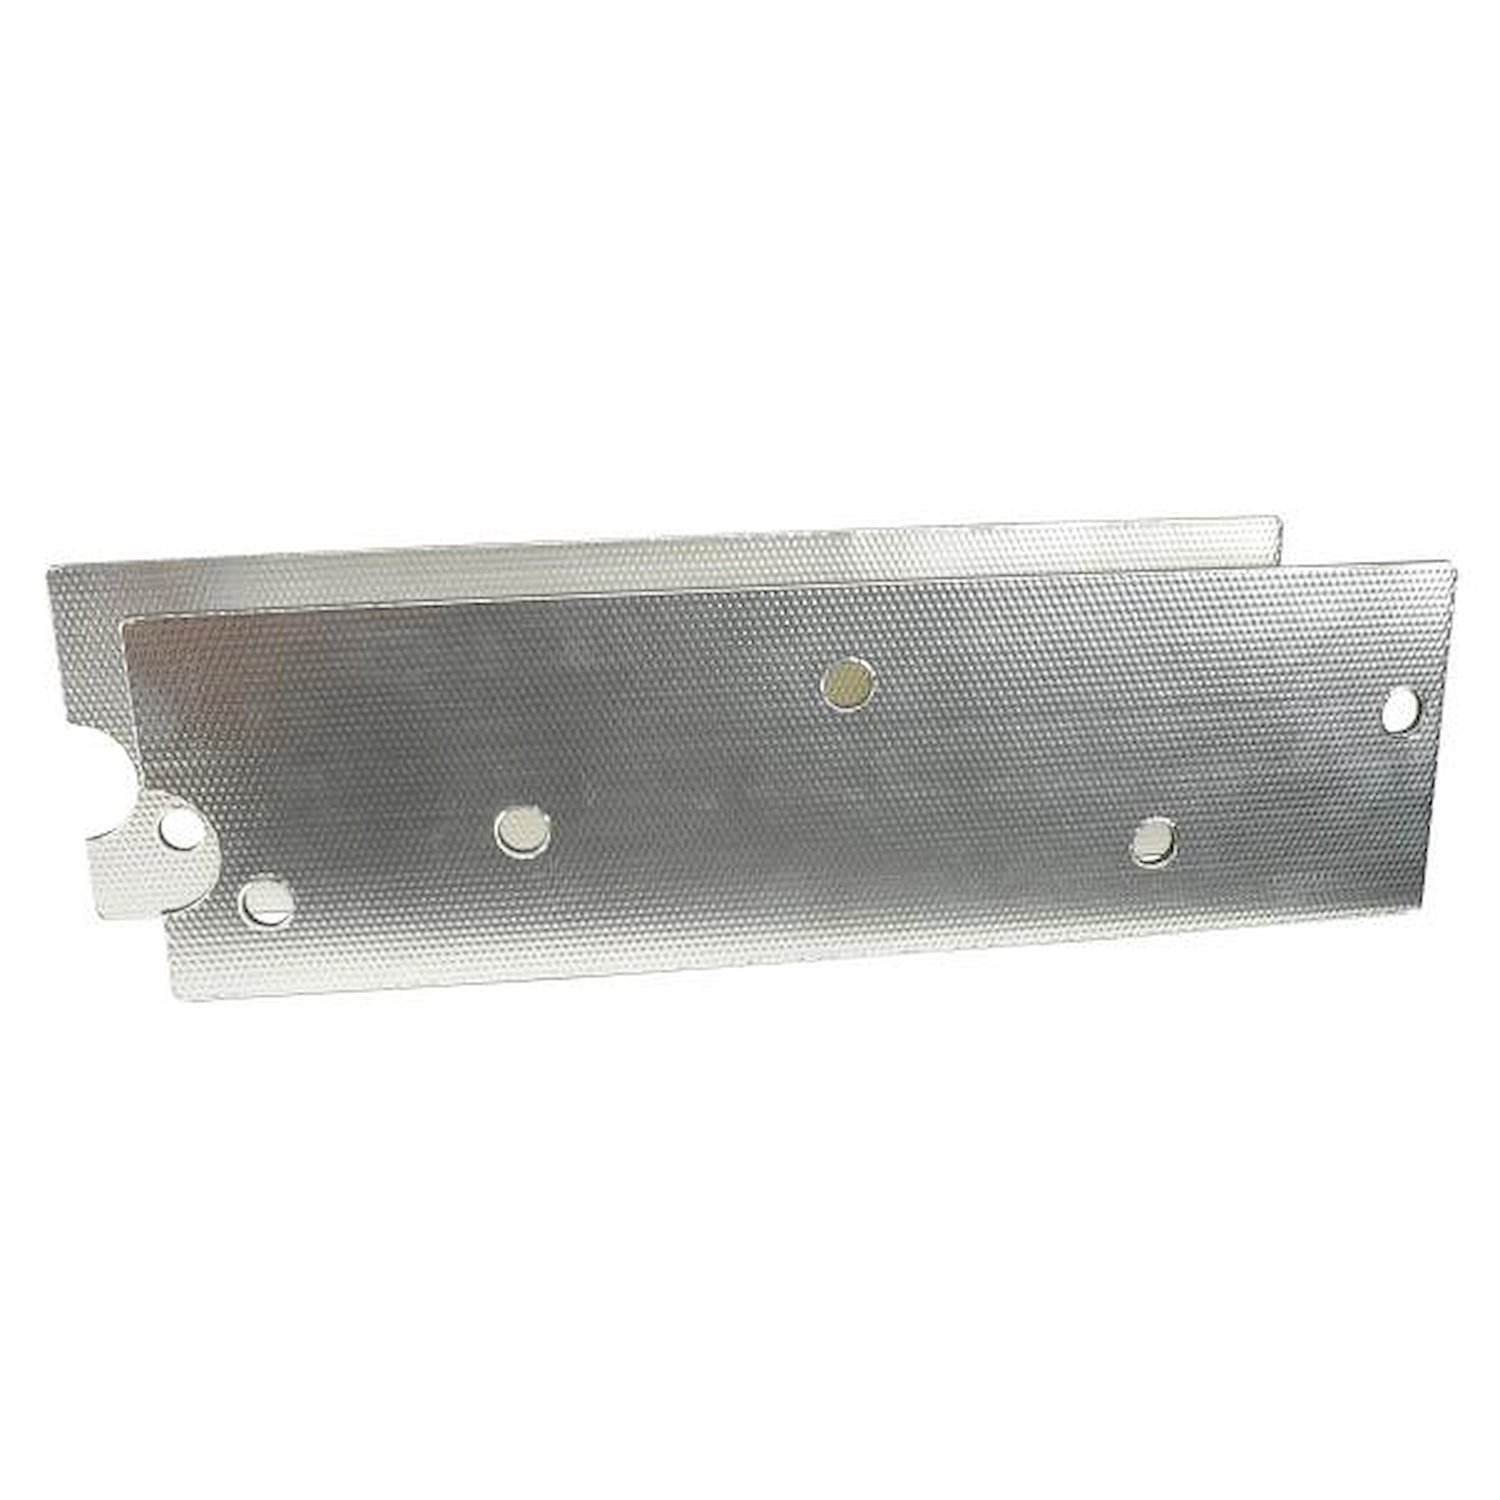 LS Engine Coil Pack Shield